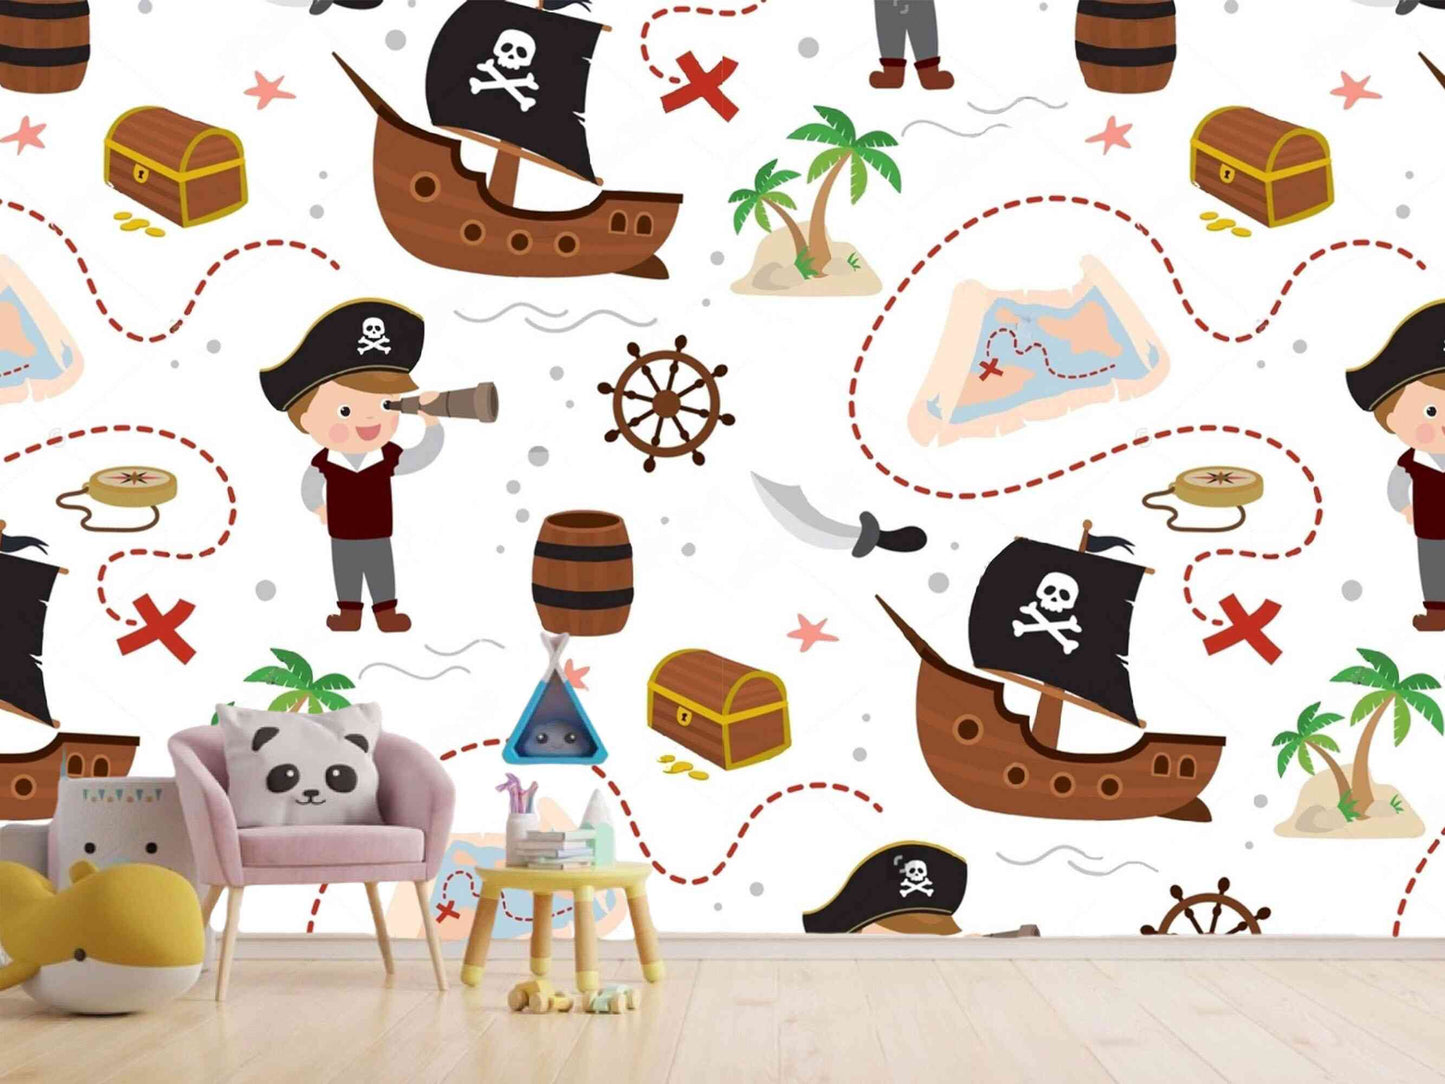 Colorful cartoon wallpaper for boys' room decoration - AccentWallpapers